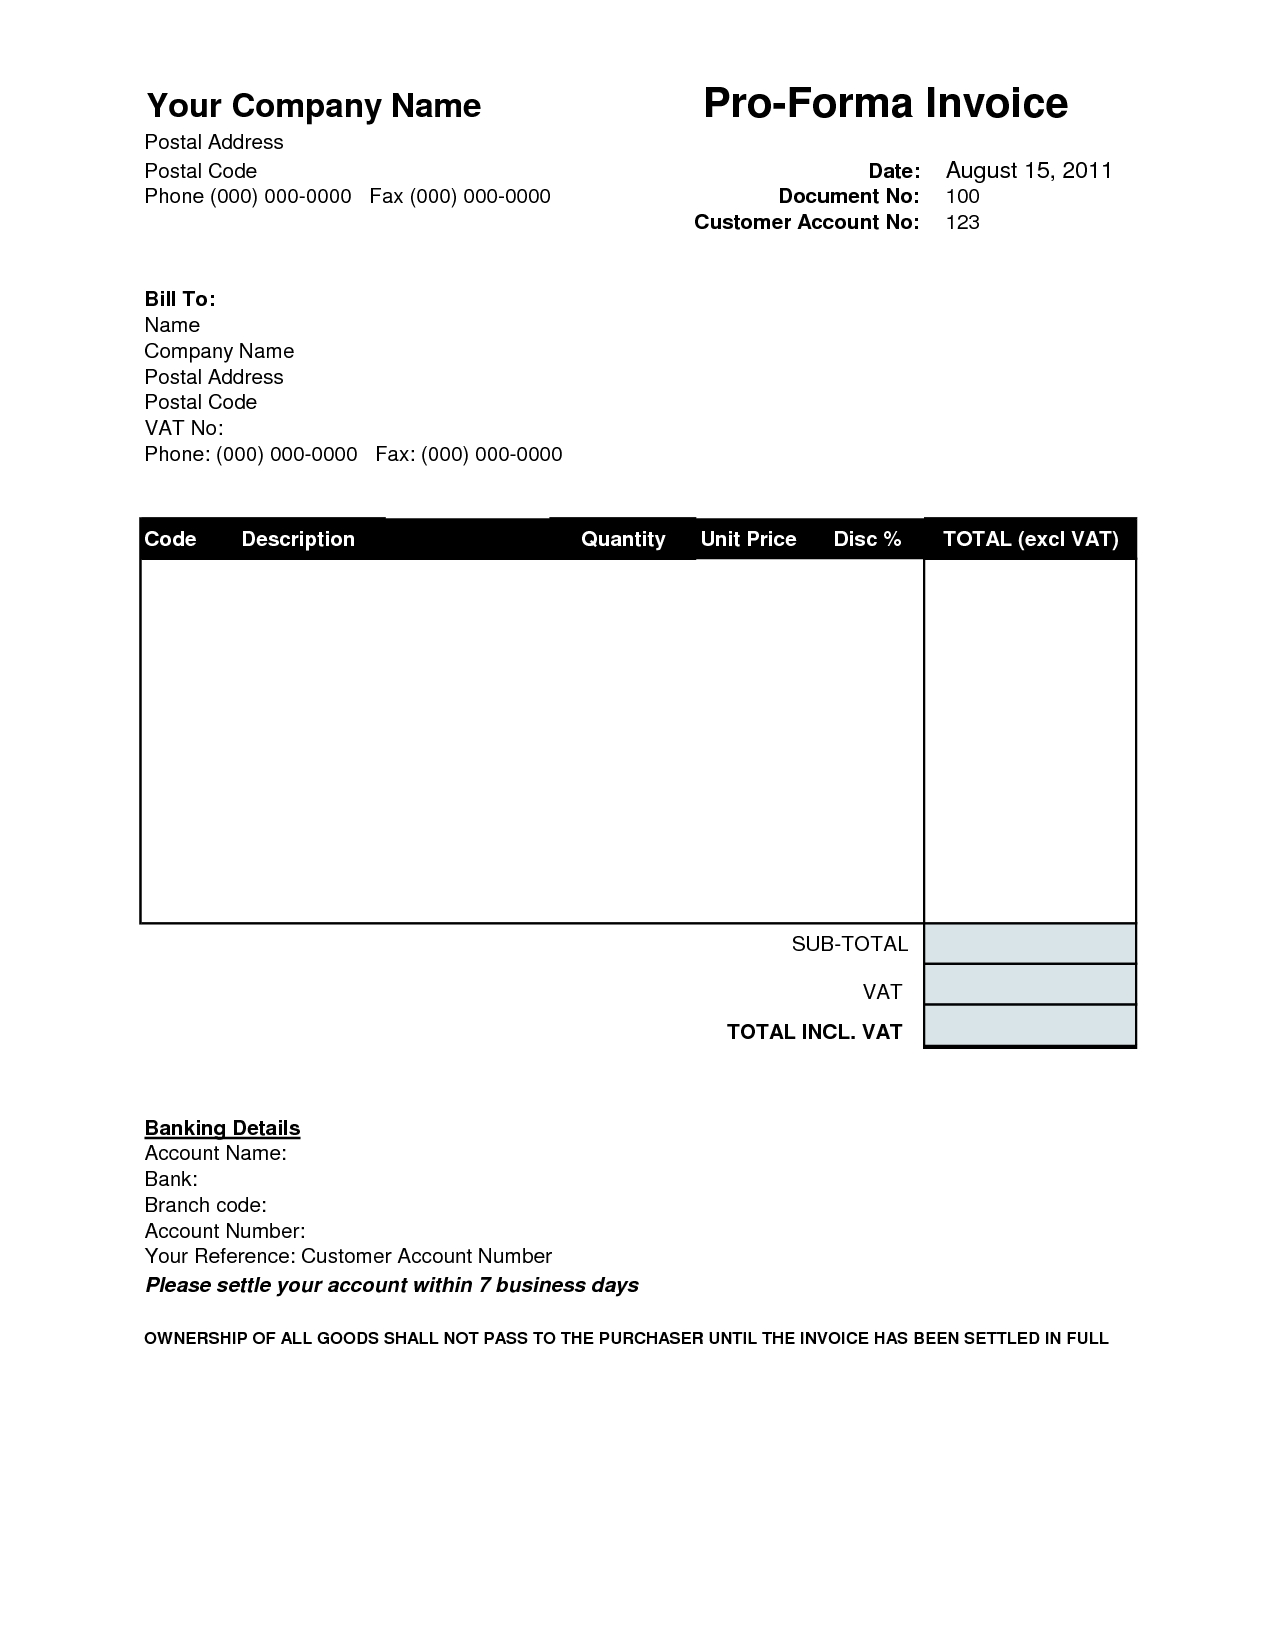 sample of a proforma invoice pro forma invoice free business template 1275 X 1650